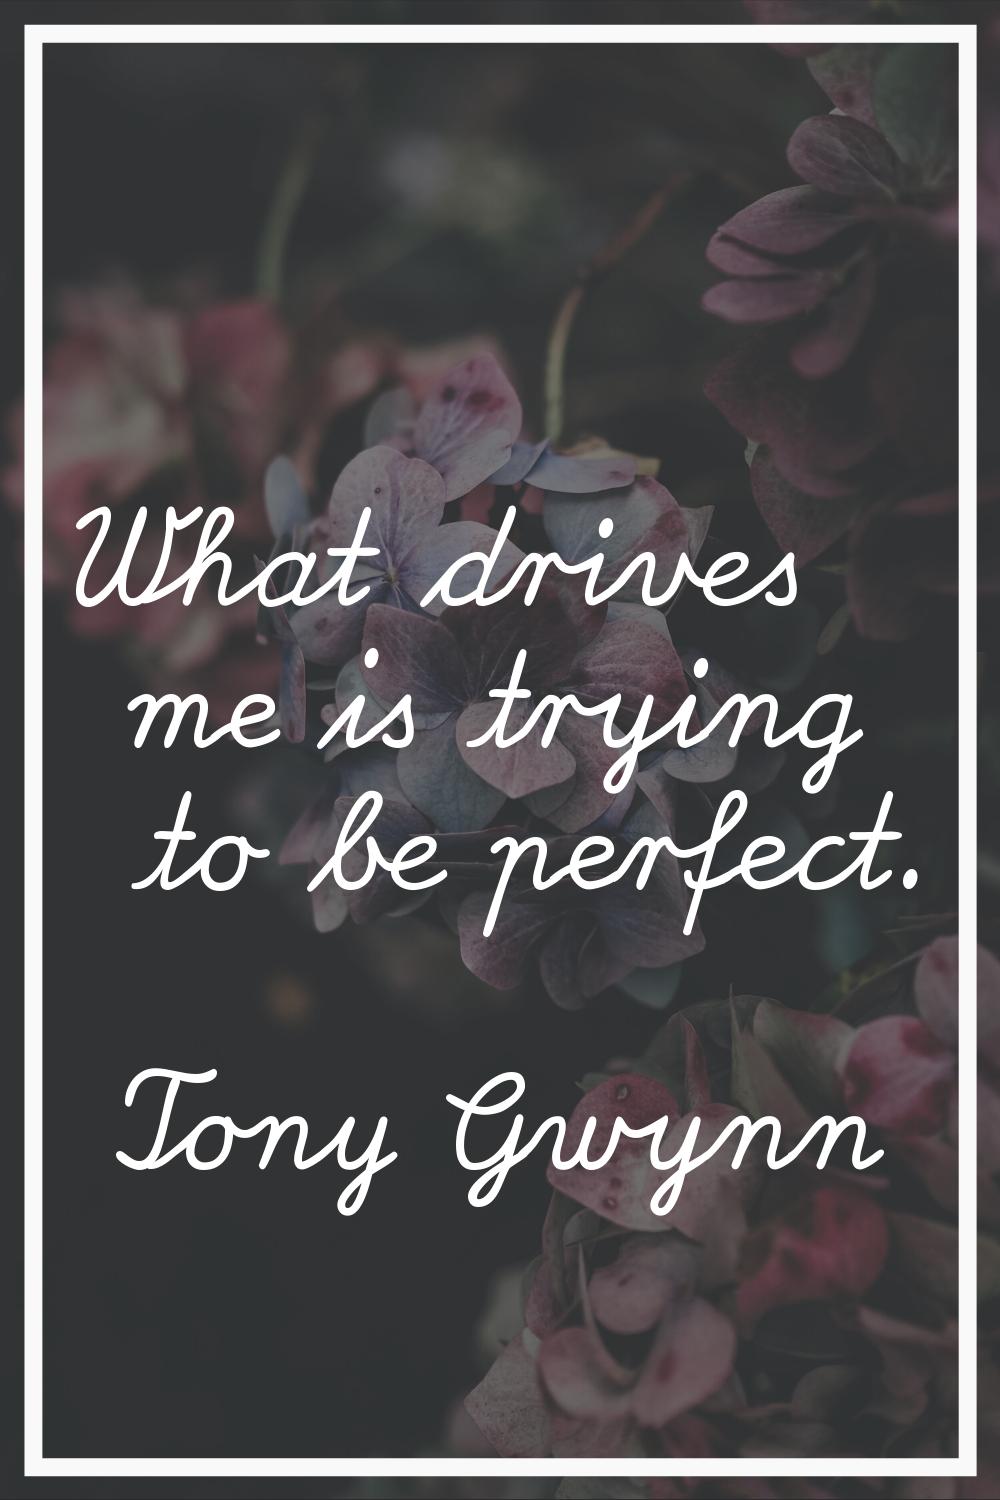 What drives me is trying to be perfect.